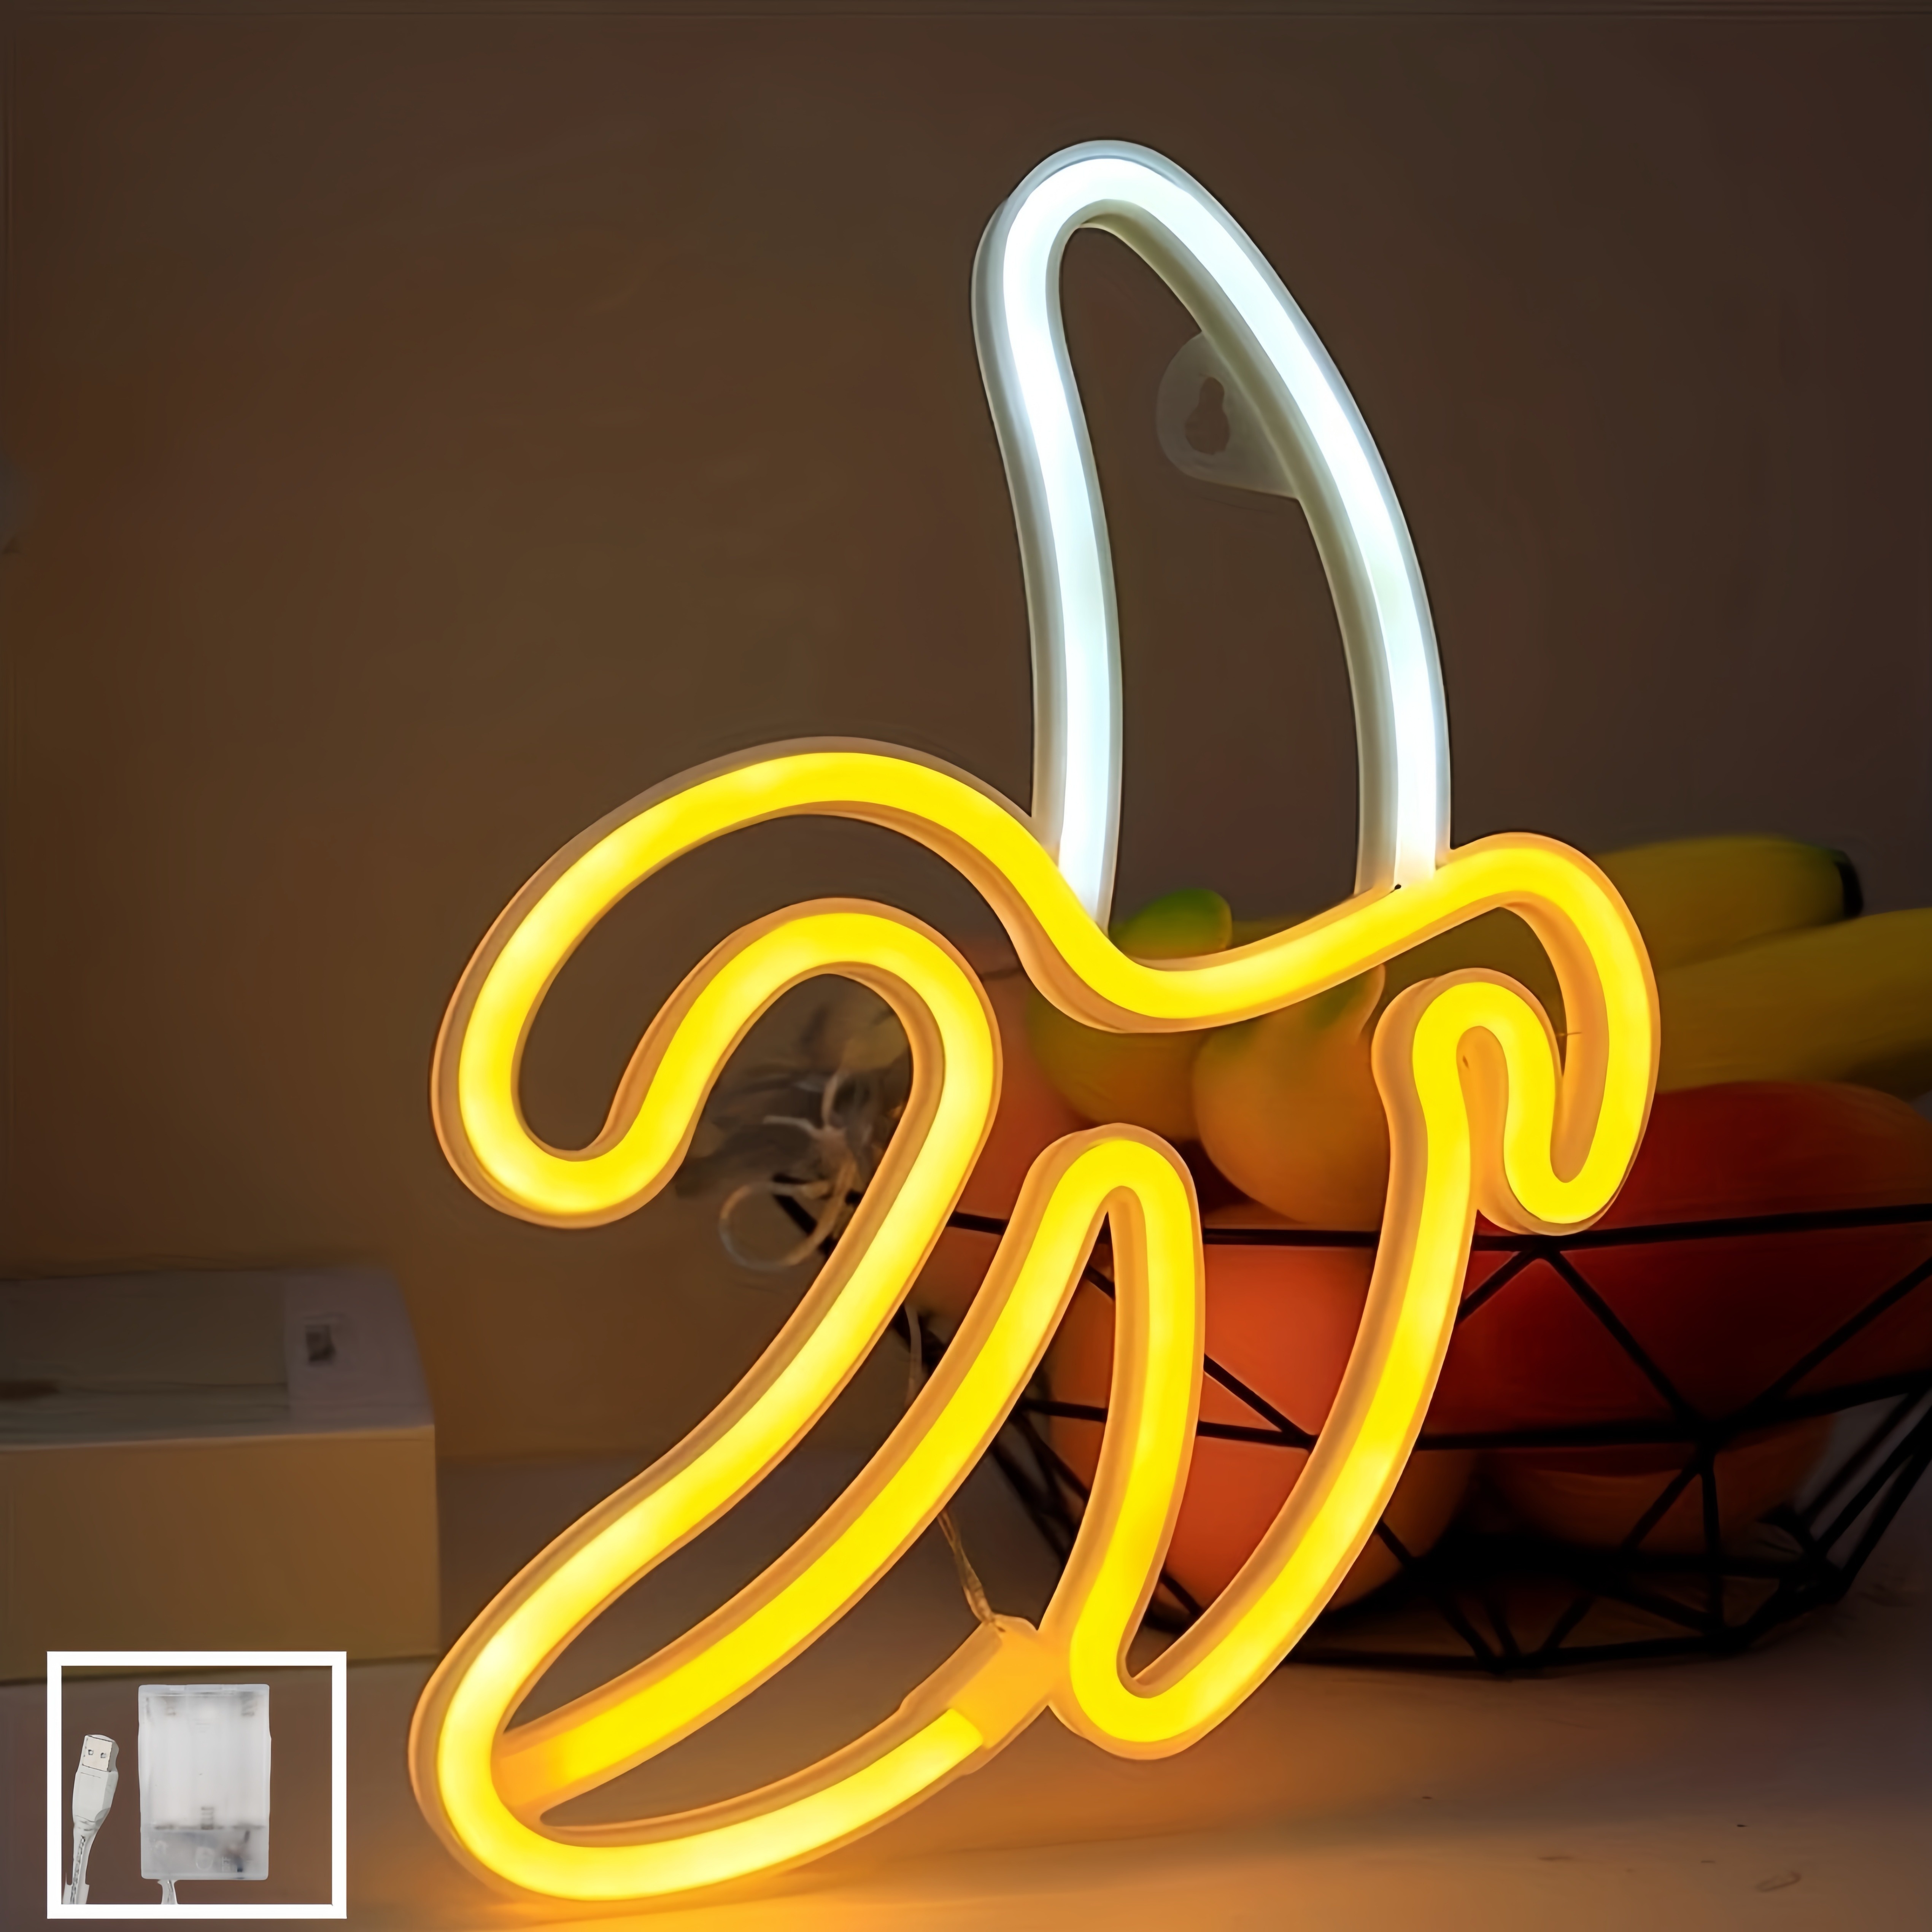 

1pc Banana Neon Signs, Banana Neon Light 11.4"x7.9" Inch Led Neon Lights For Wall Decor, Usb/battery Powered Night Lamps Light Up Signs For Christmas, Birthday Party, Living Room, Home Decor